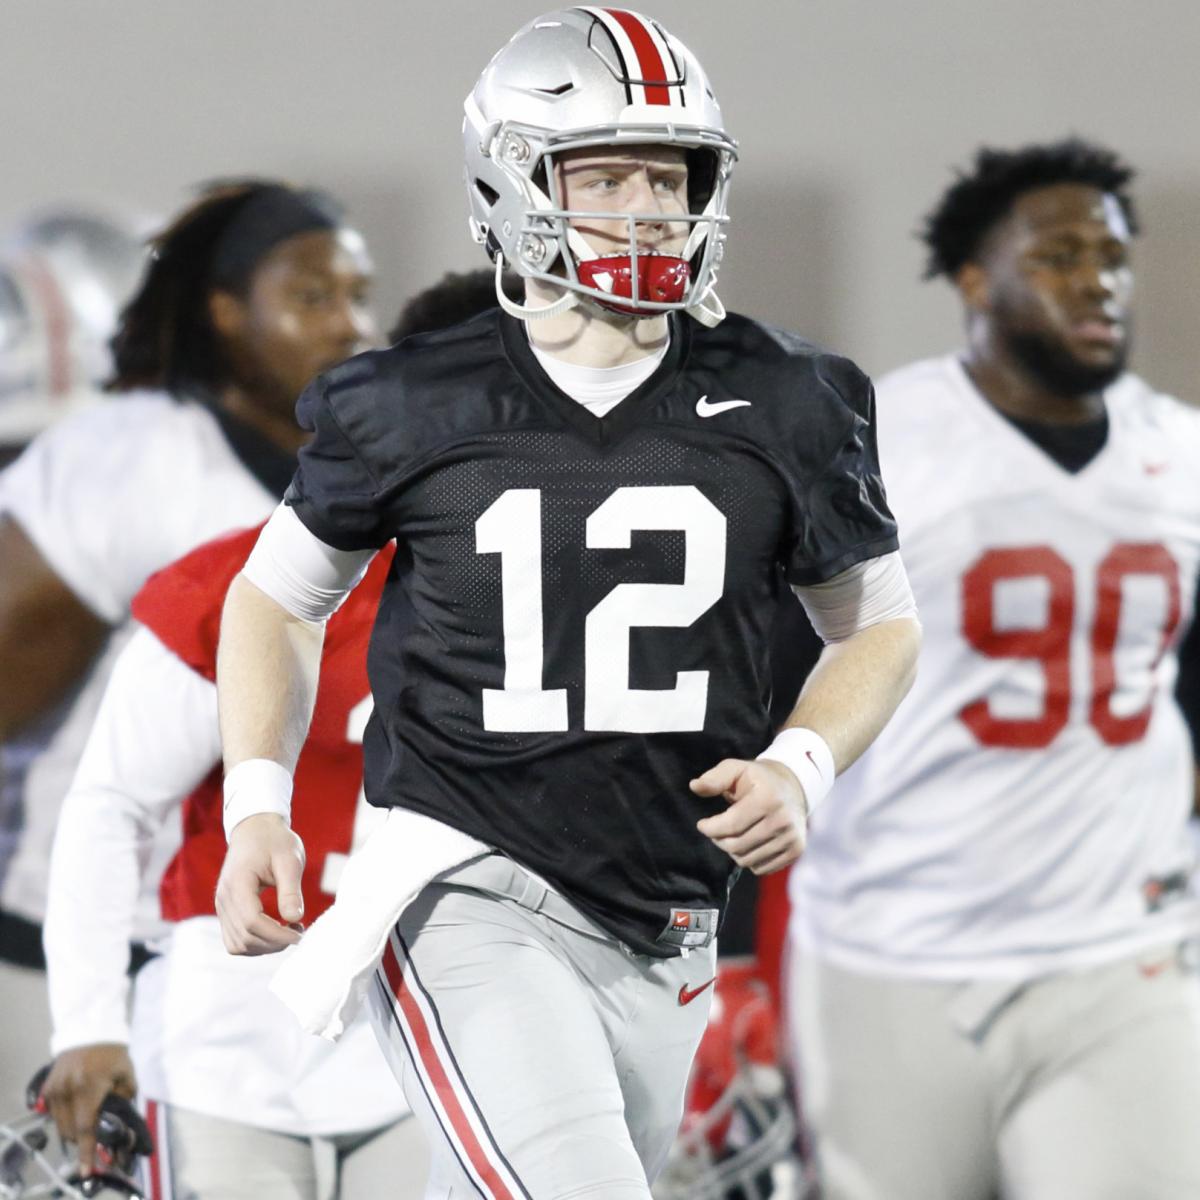 Justin Fields Leads Gray to 35-17 Win vs. Scarlet in 2019 Ohio State Spring Game